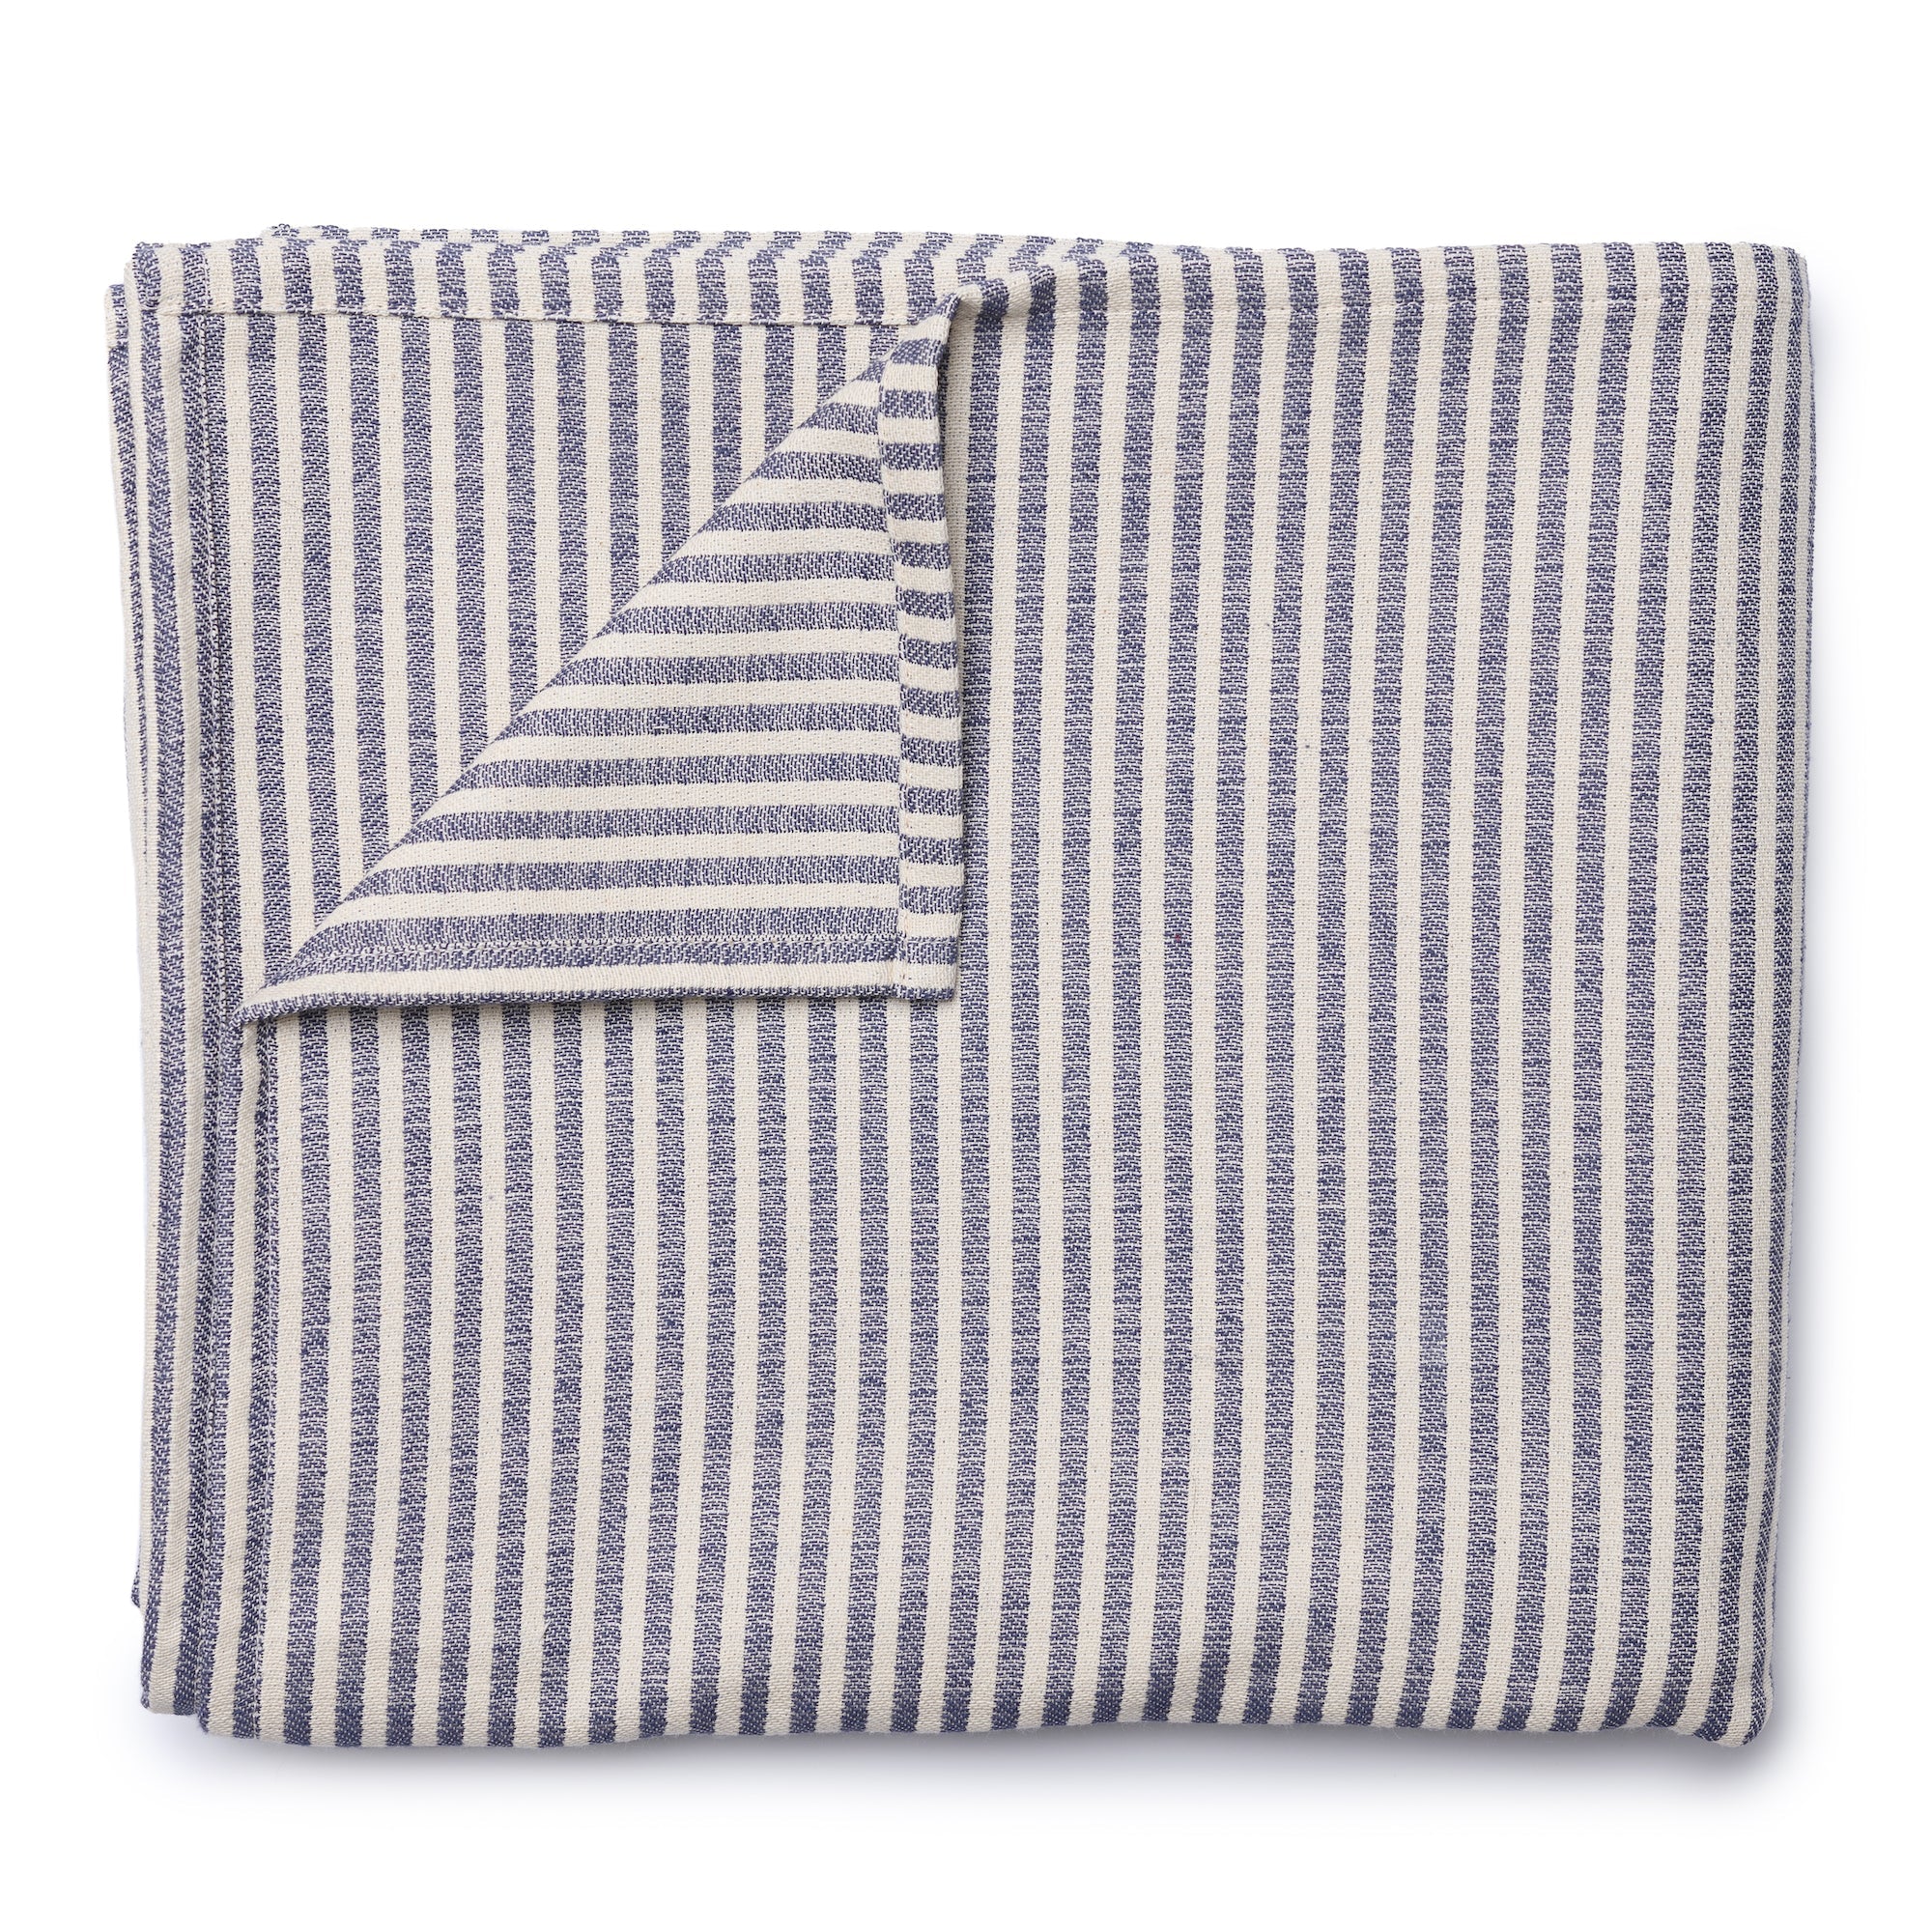 Harbour Stripe Large Tablecloth Navy